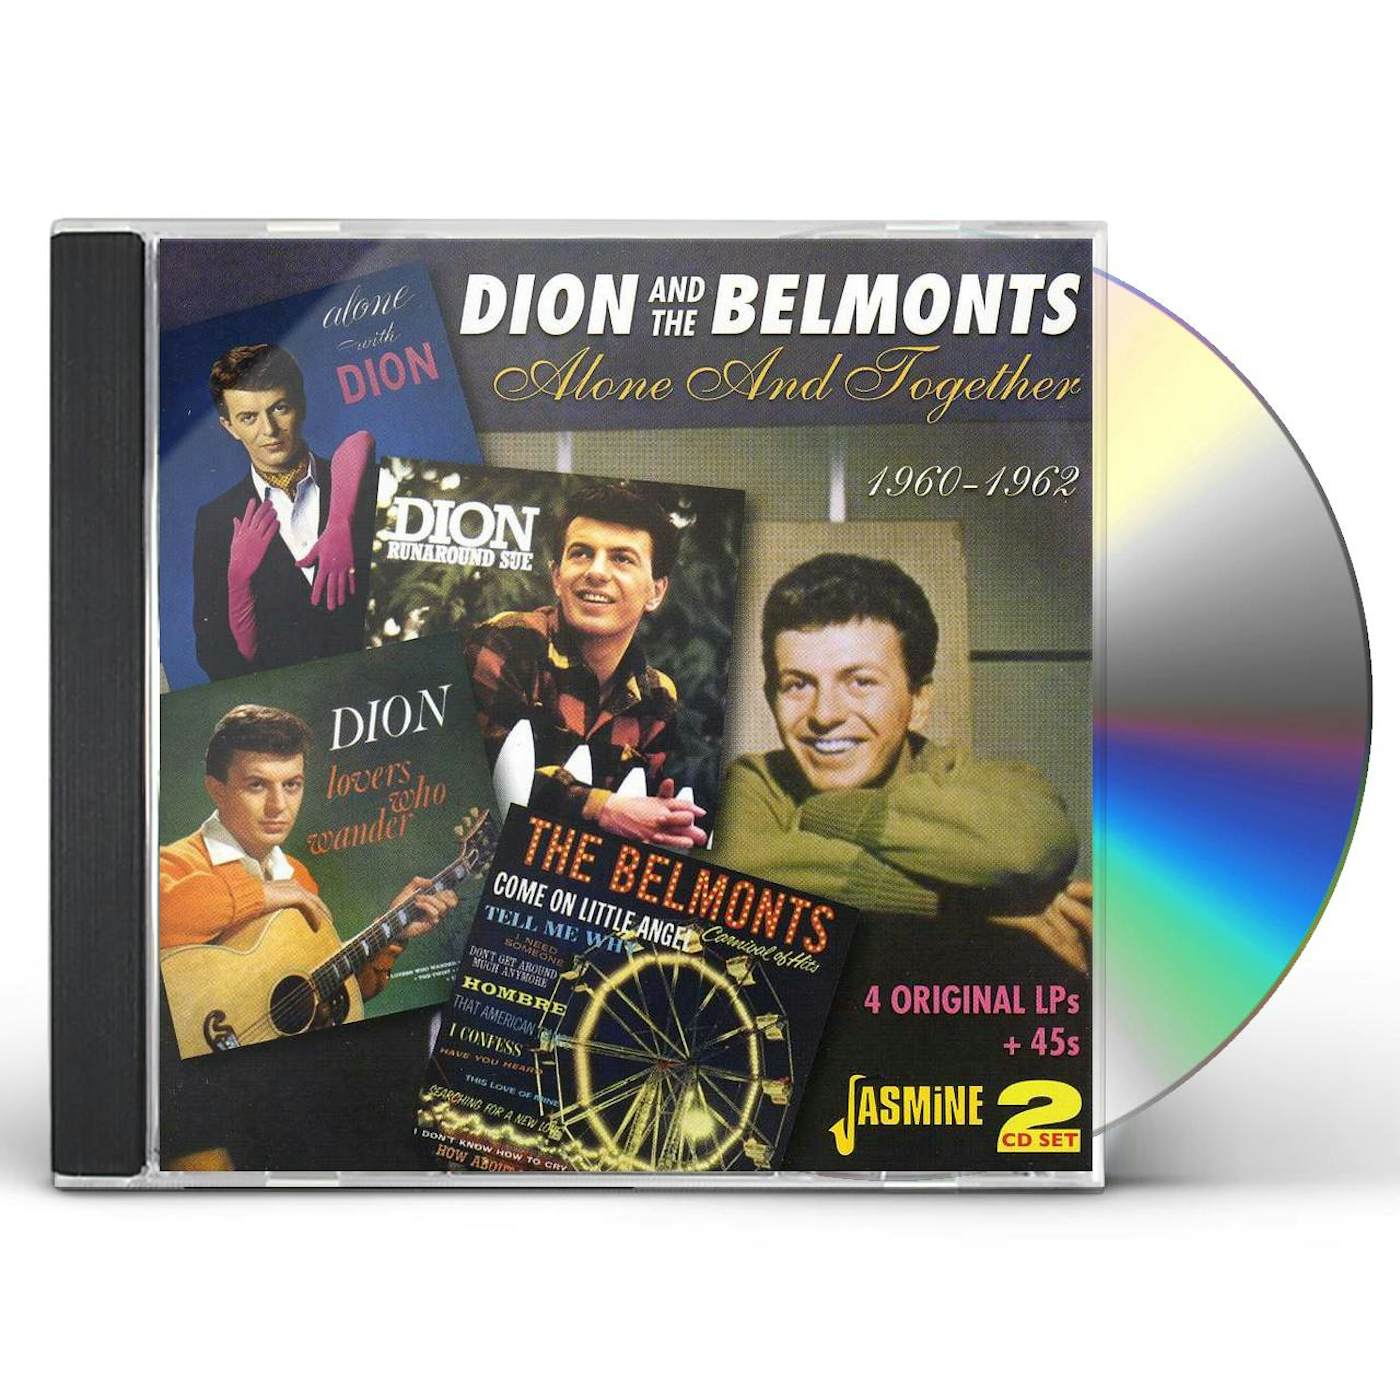 Dion & The Belmonts ALONE & TOGETHER CD